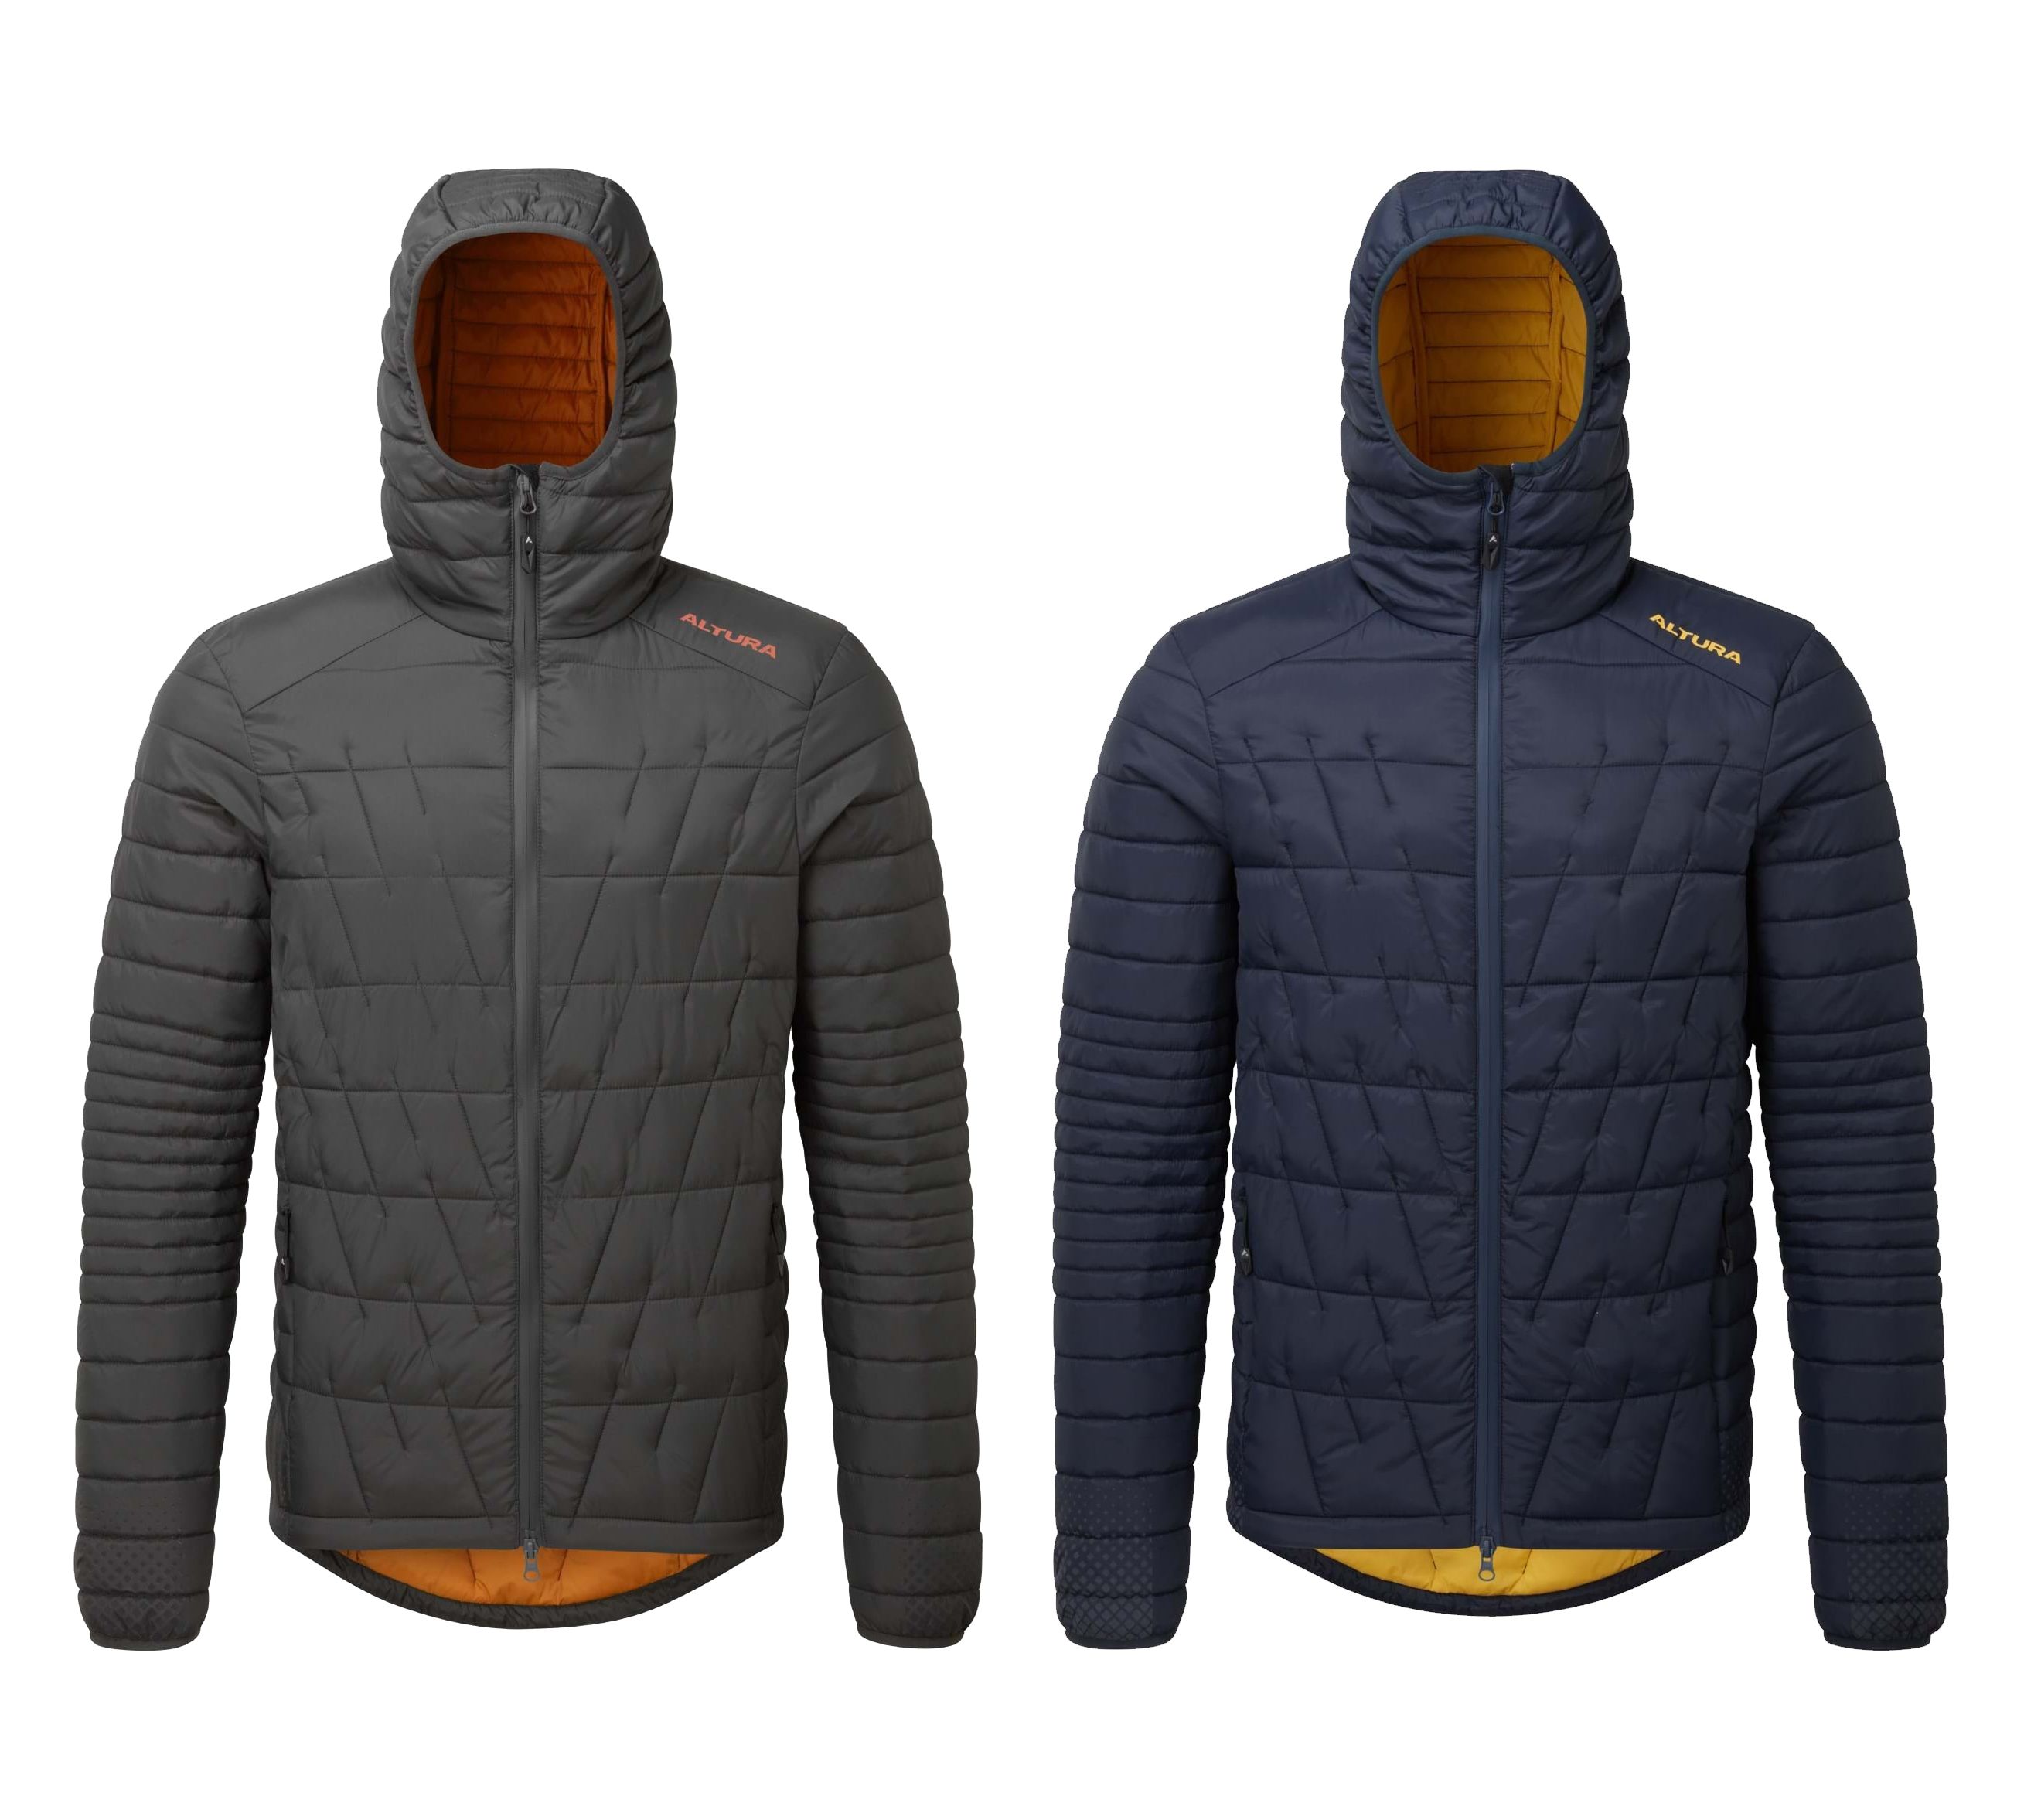 Altura Twister Insulated Jacket - £99.99 | Jackets - Windproof / Water ...